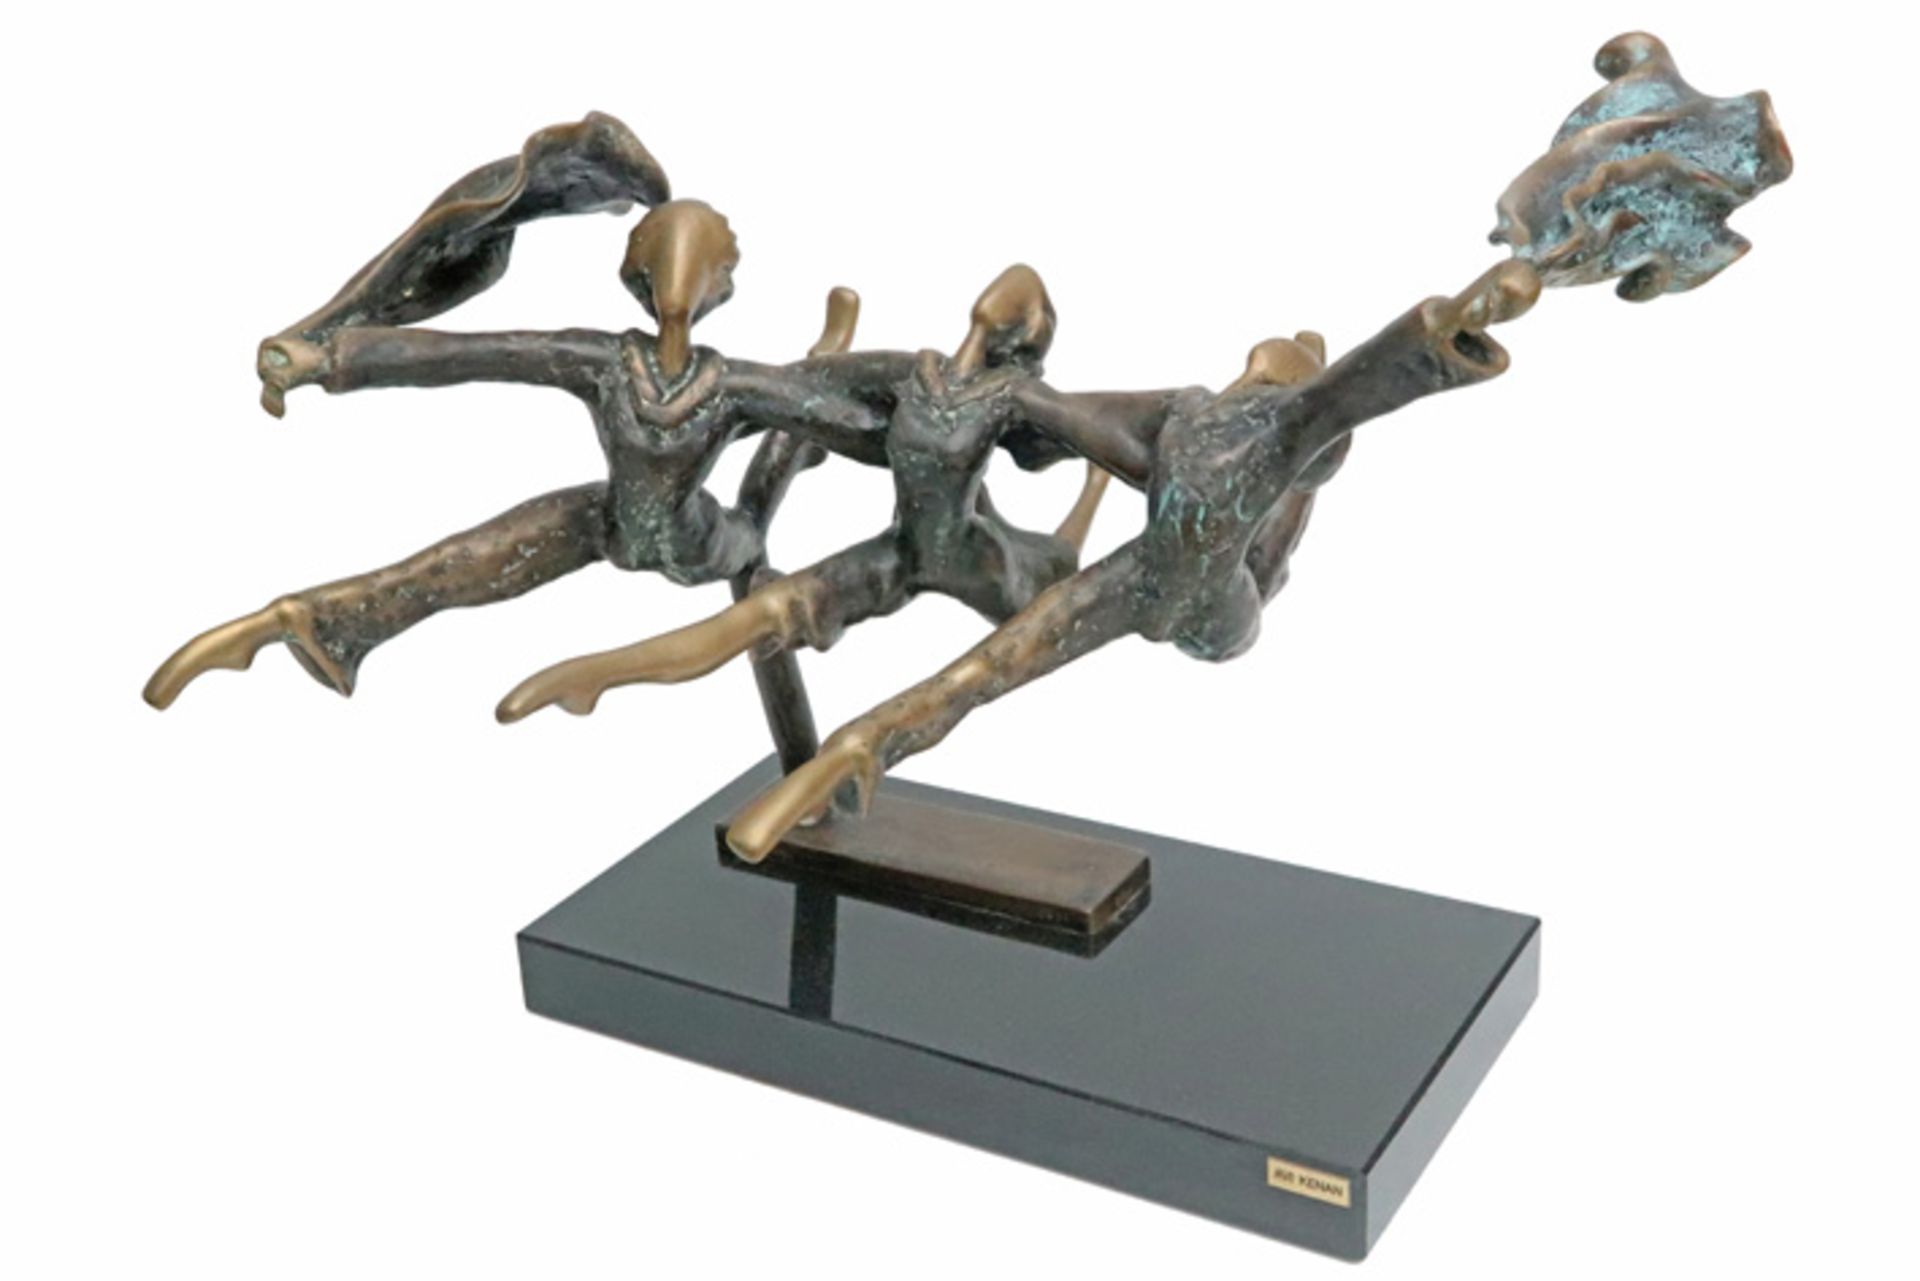 20th Cent. Avi Kenan sculpture in bronze titled "Flying Dancers" - signed and dated 1980 || AVI - Image 3 of 7